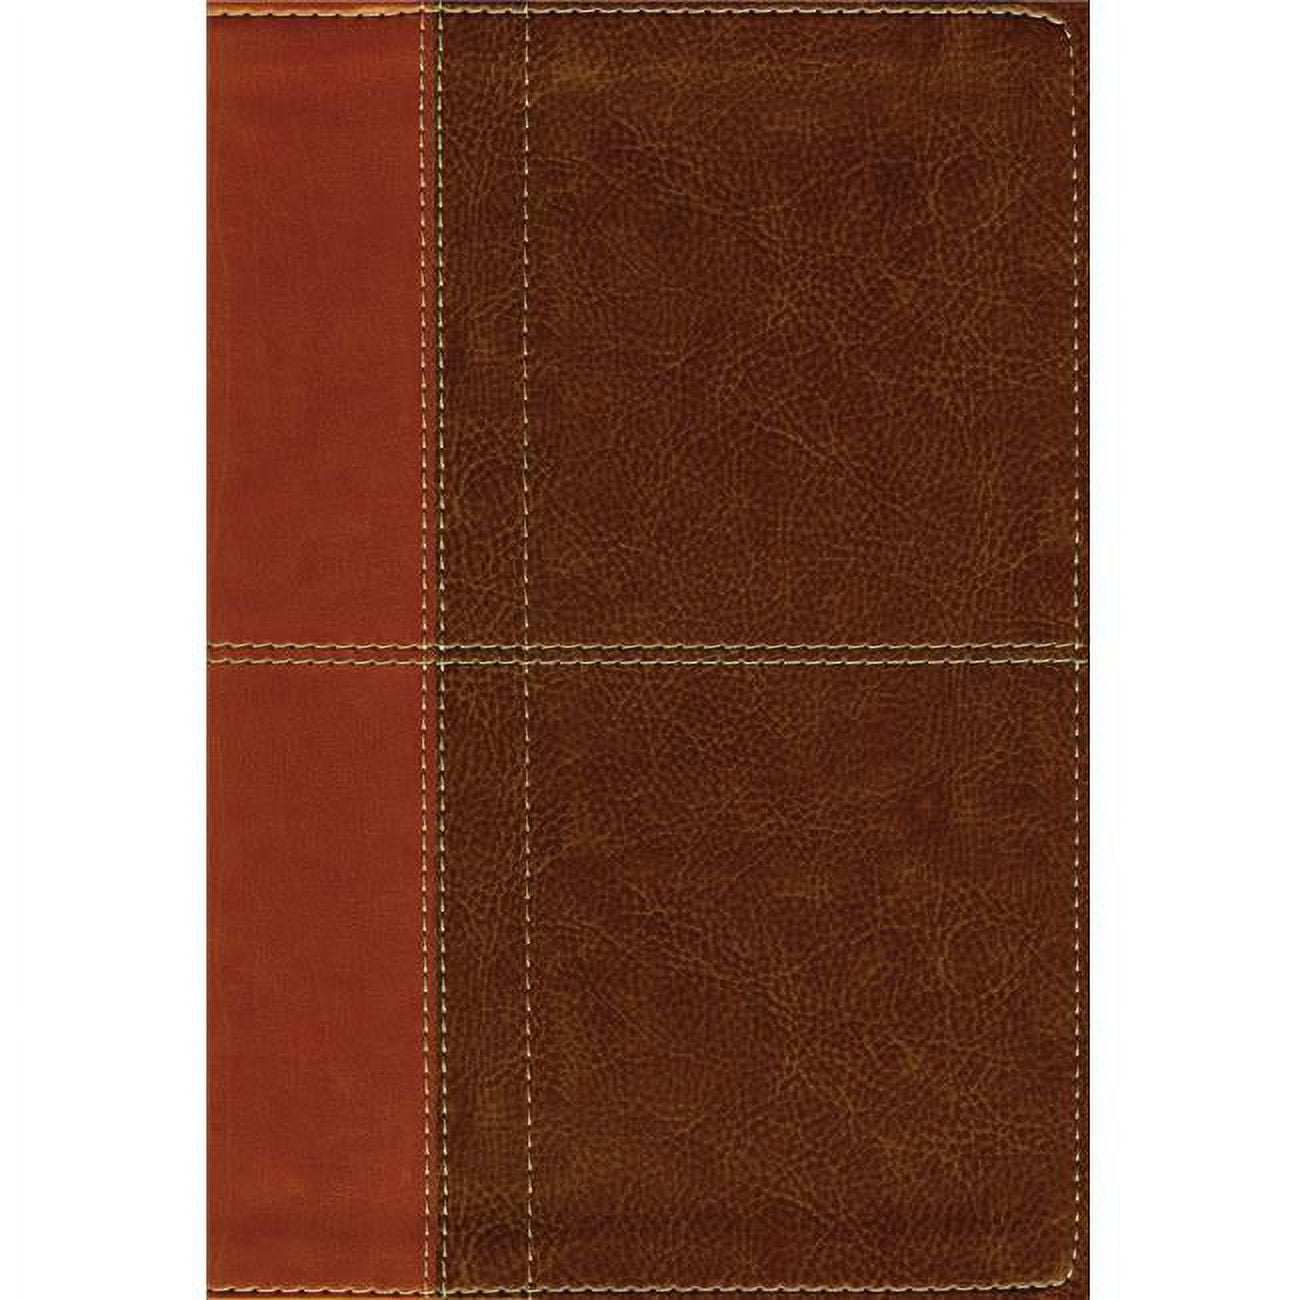 157864 NIV Life Application Study Bible - Large Print - Third Edition, Brown Leathersoft - Apr 2020 -  Zondervan